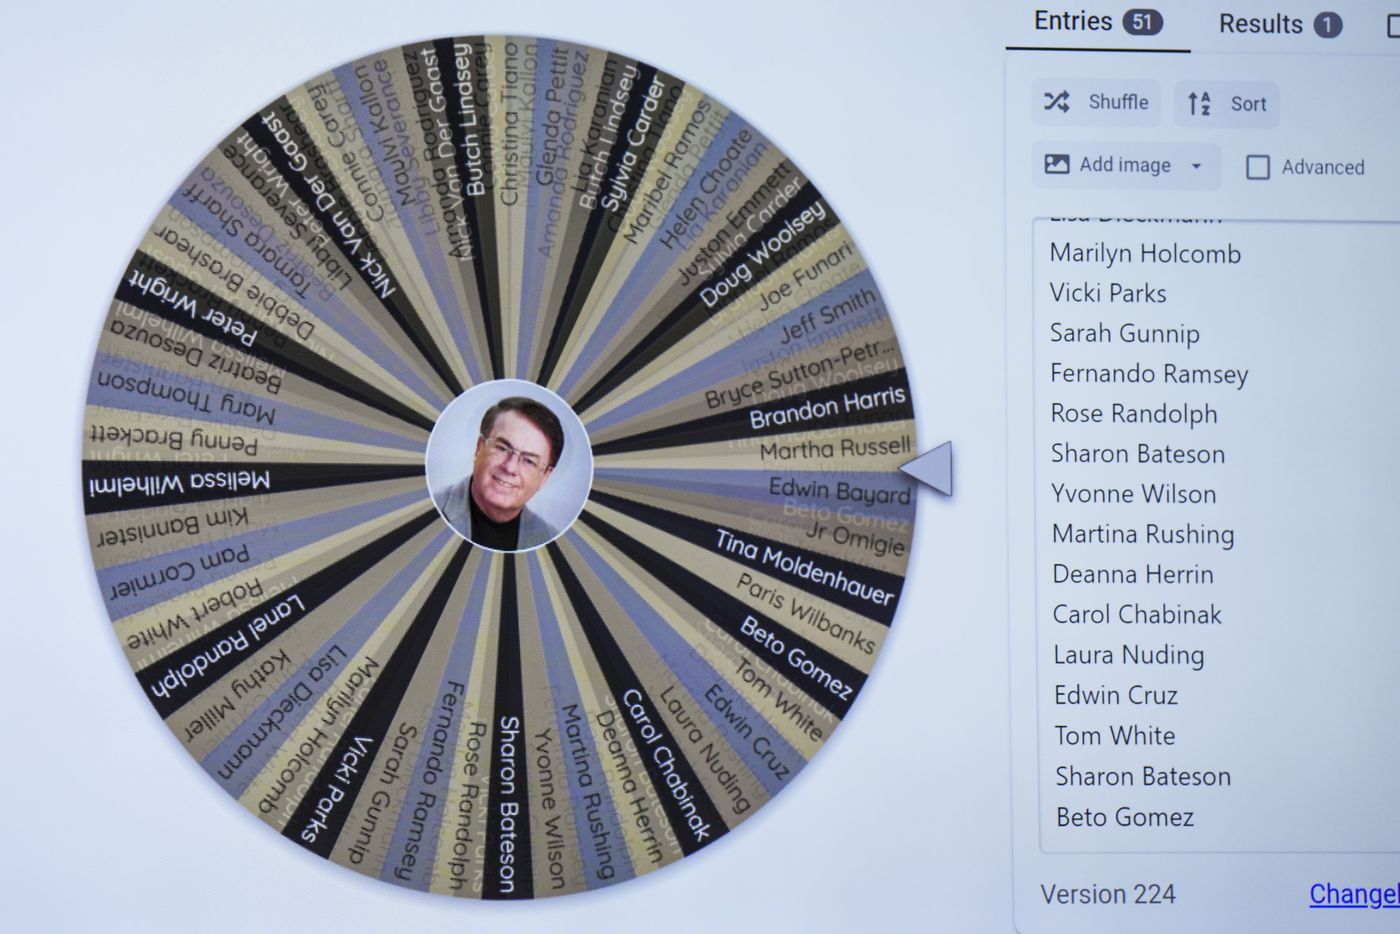 Mike Bowman’s face is at the center of an online game used to spin for cash prizes during...